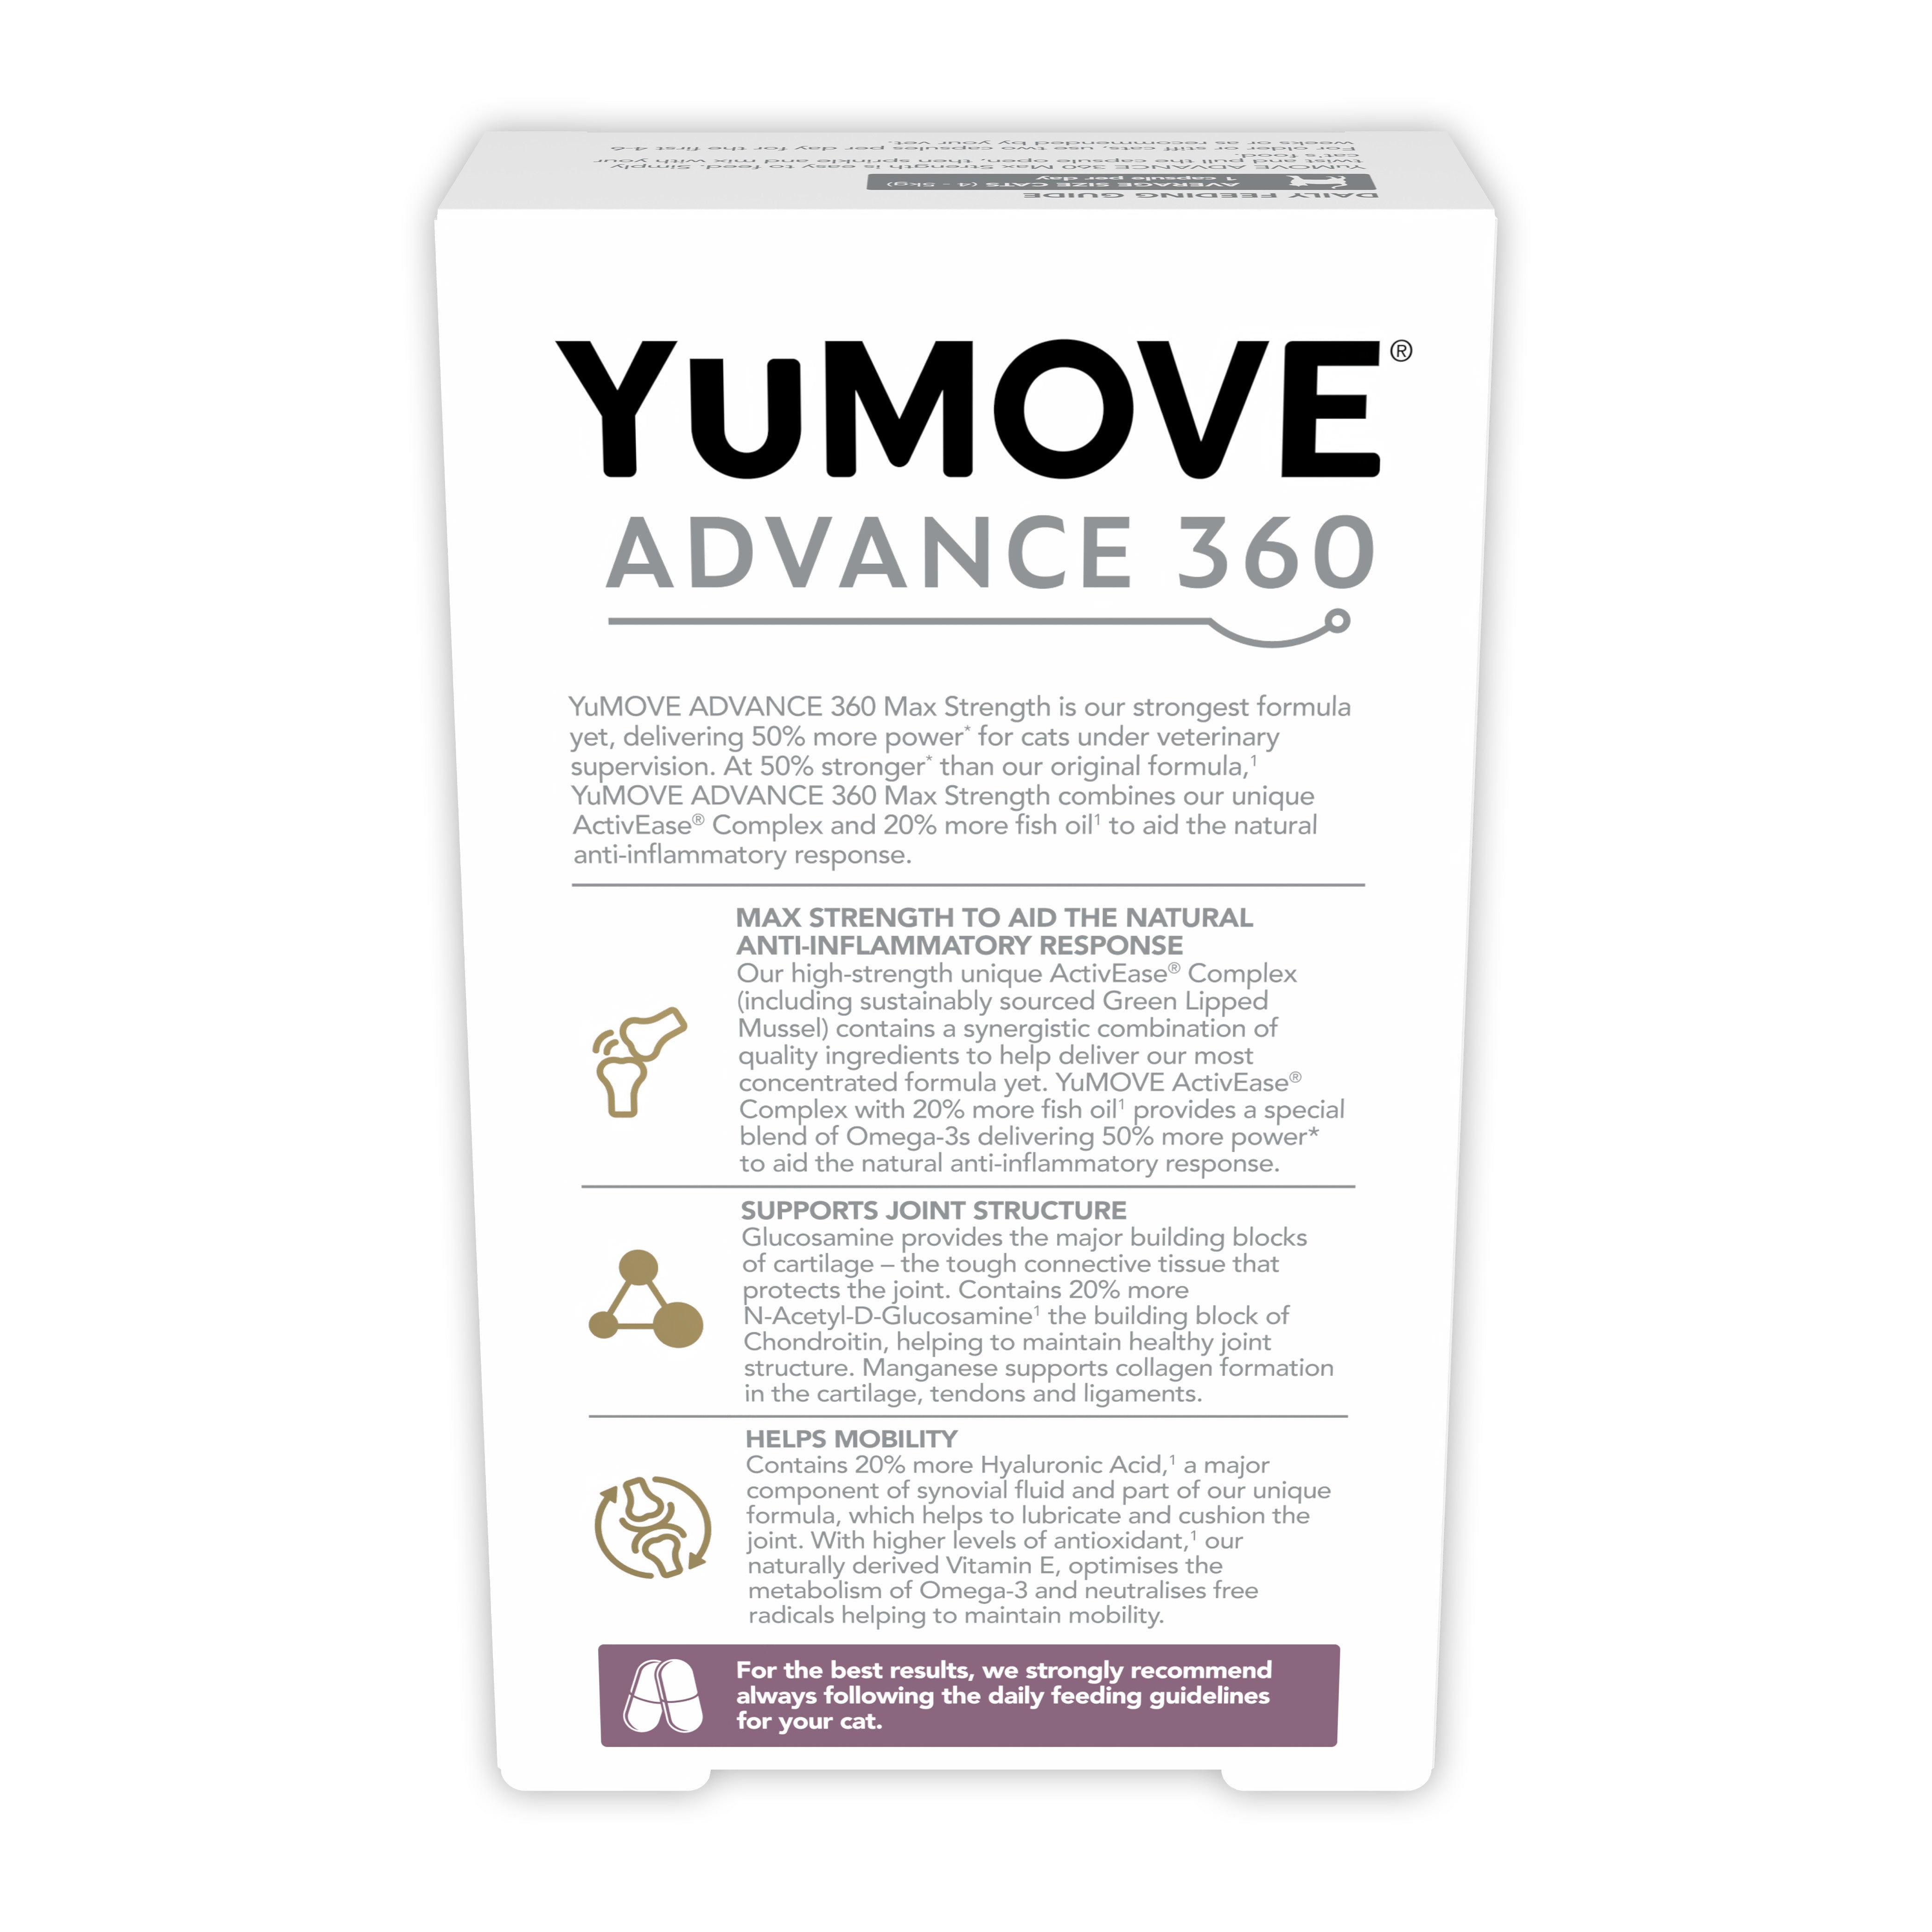 YuMOVE ADVANCE 360 Max Strength Joint Care for Cats